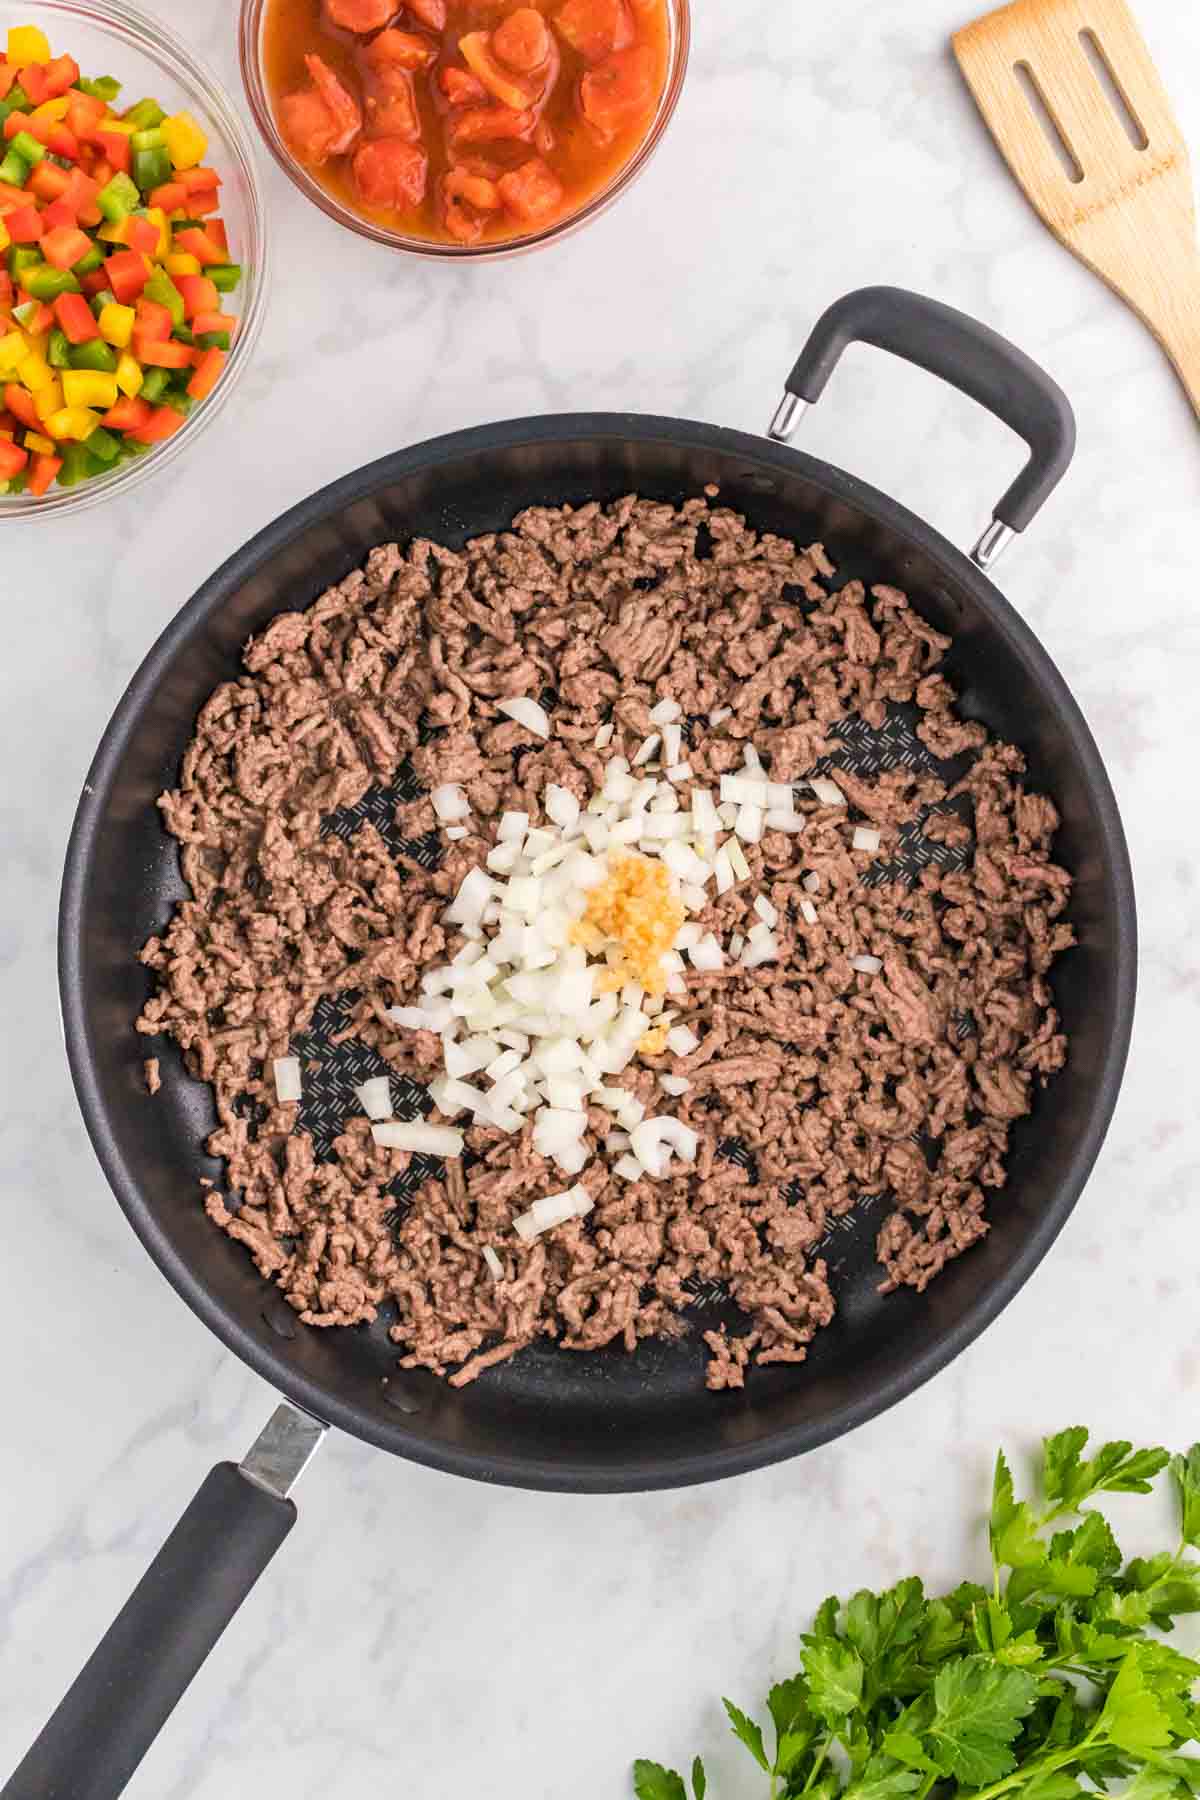 minced garlic and diced onions on top of cooked ground beef in a skillet